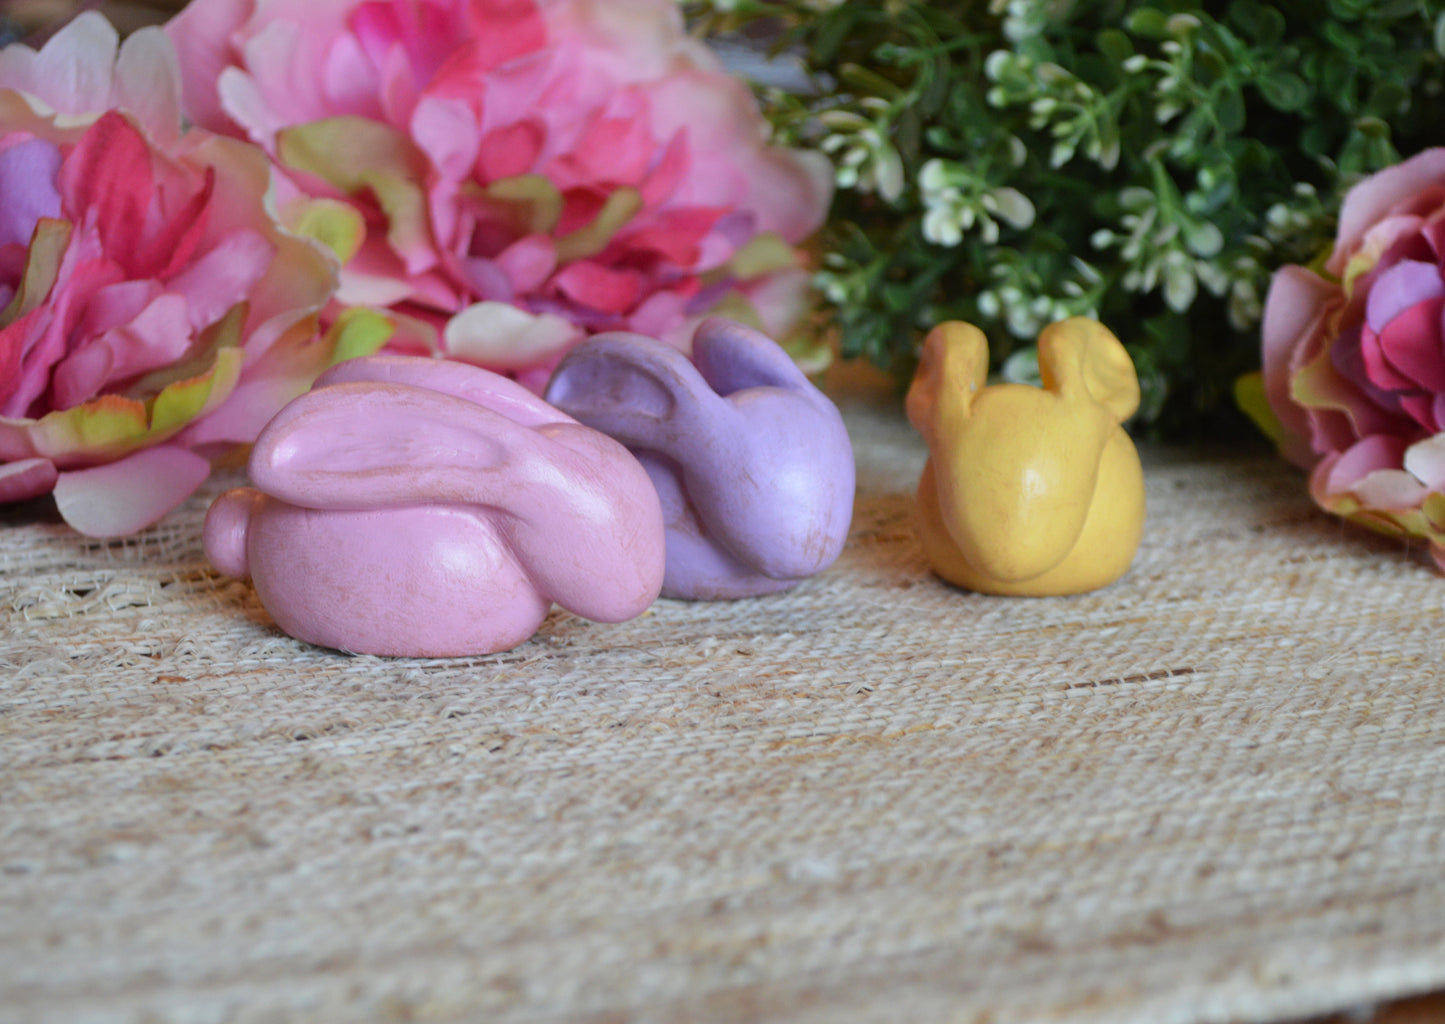 Easter bunnies / 3 pastel Easter Pascua decorations, dinner table decor for Spring Holiday / cute small handmade Easter gift hostess gifts